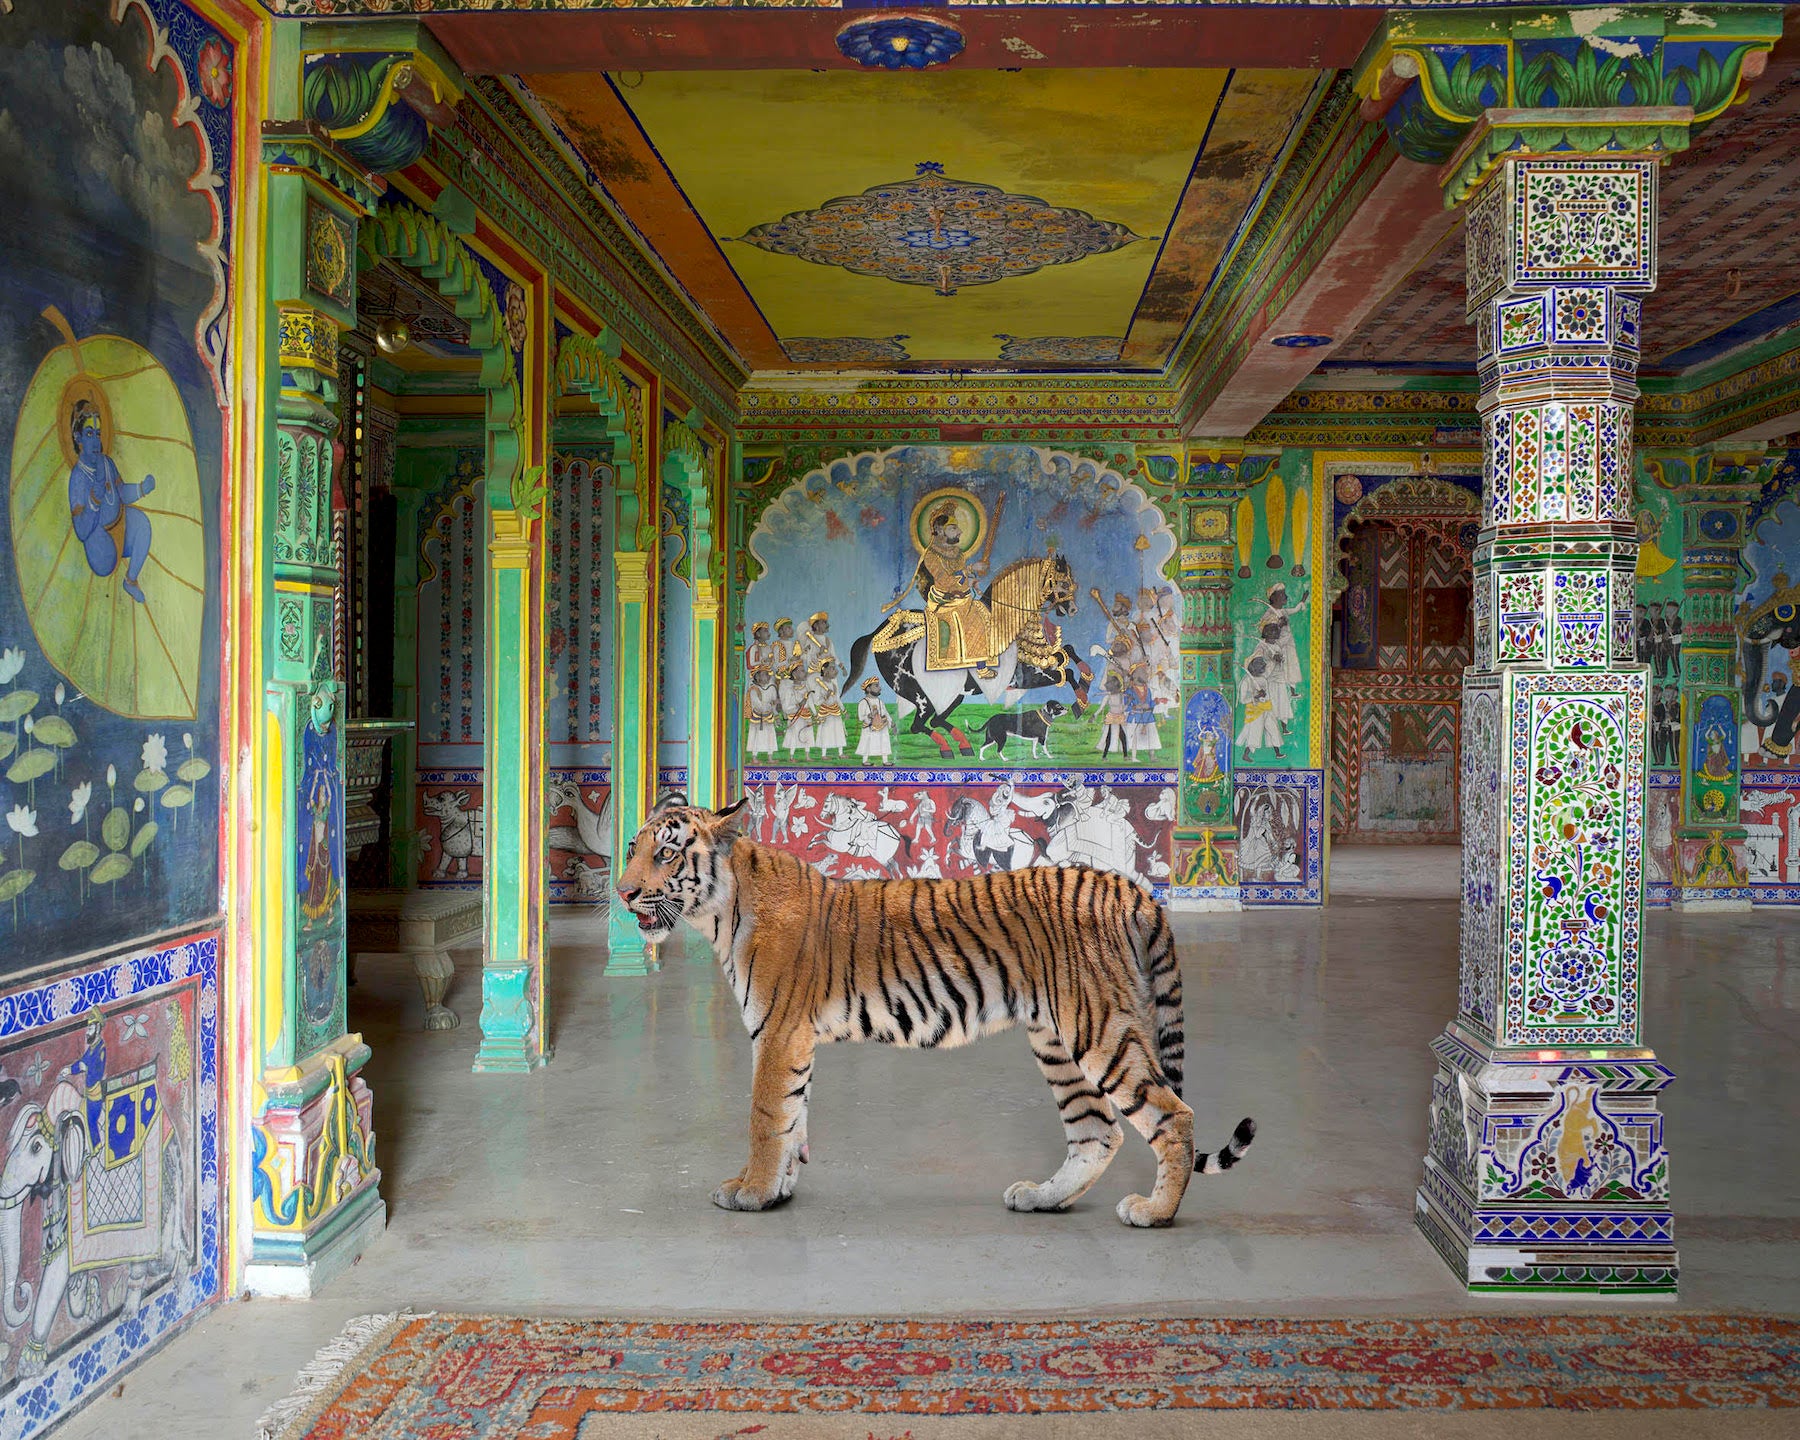 In Karen Knorr’s Sumptuous Photos, Exotic Animals Appear in Opulent Palaces